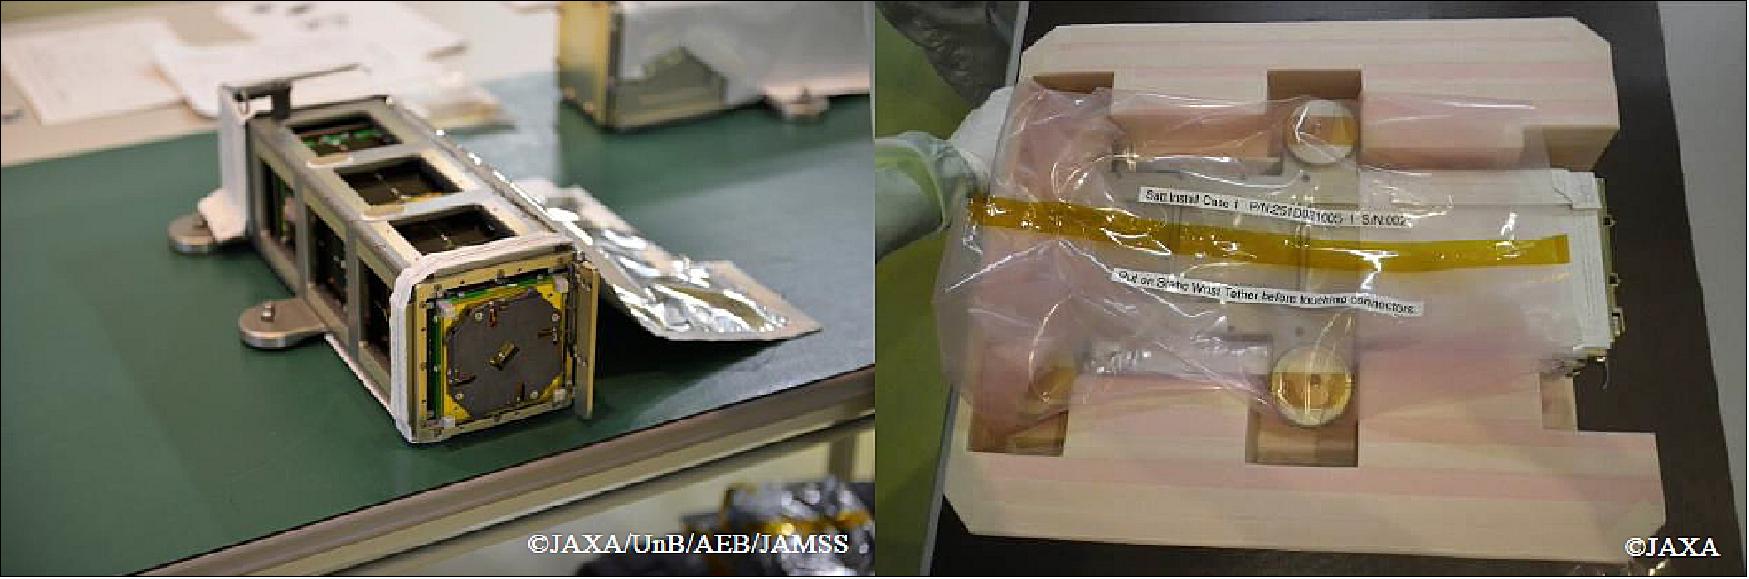 Figure 24: Preparation for launch. Left: The satellite installed in the Satellite Install Case; Right: The Satellite Install Case stowed cushion foam (image credit: JAXA)